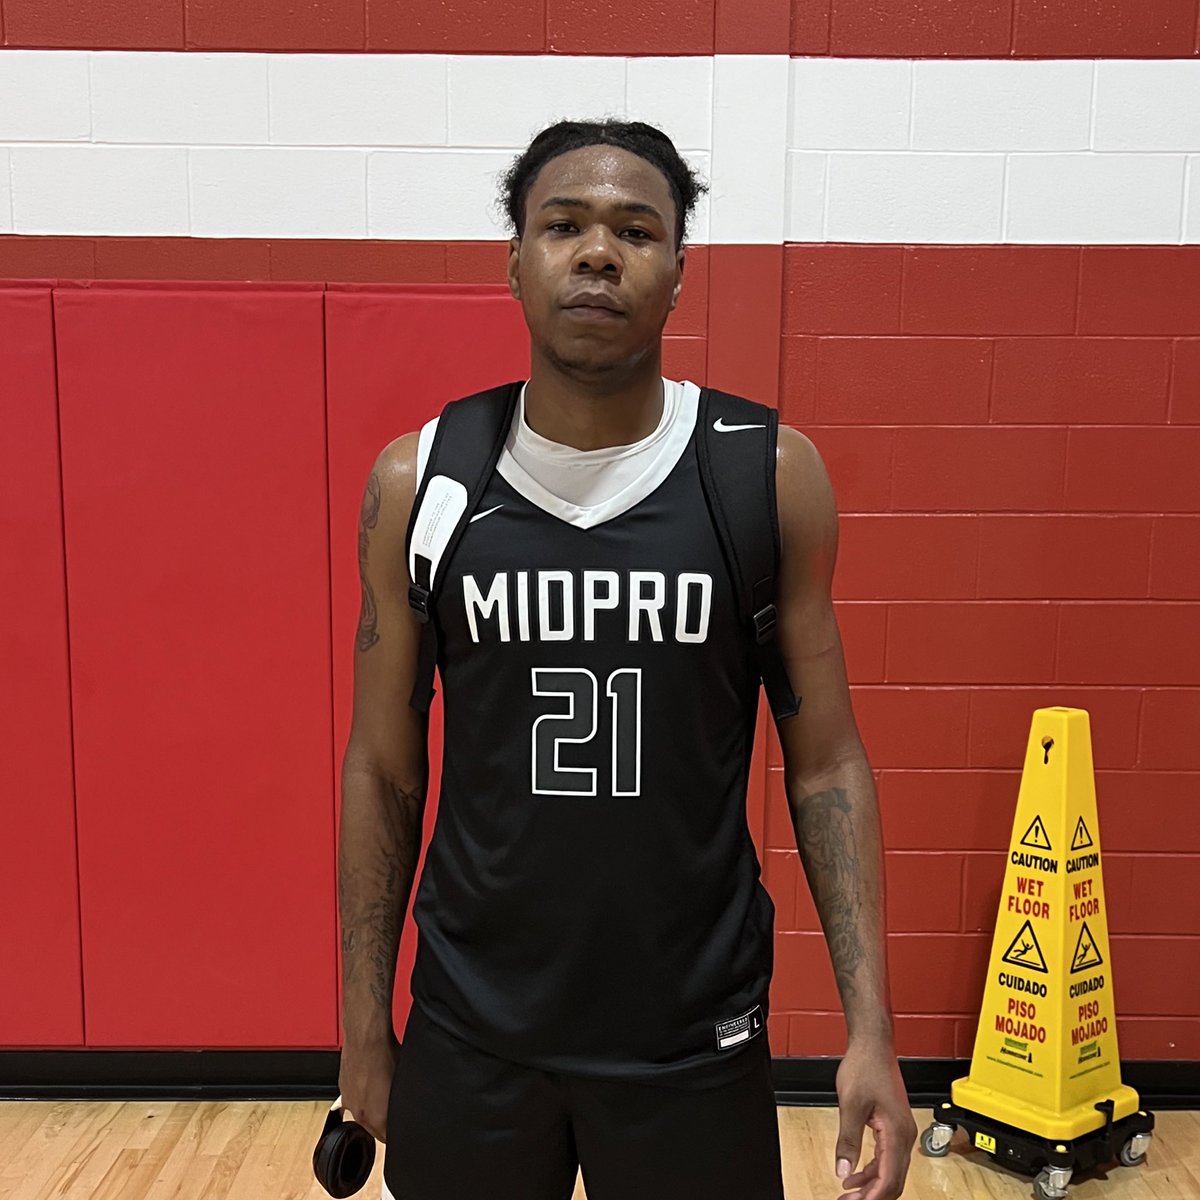 ‘25s Matt Zobrist (21 points) and Leshawn Stowers (18 points) powered @MidProAcademy to a win over Team Temple. @ny2lasports